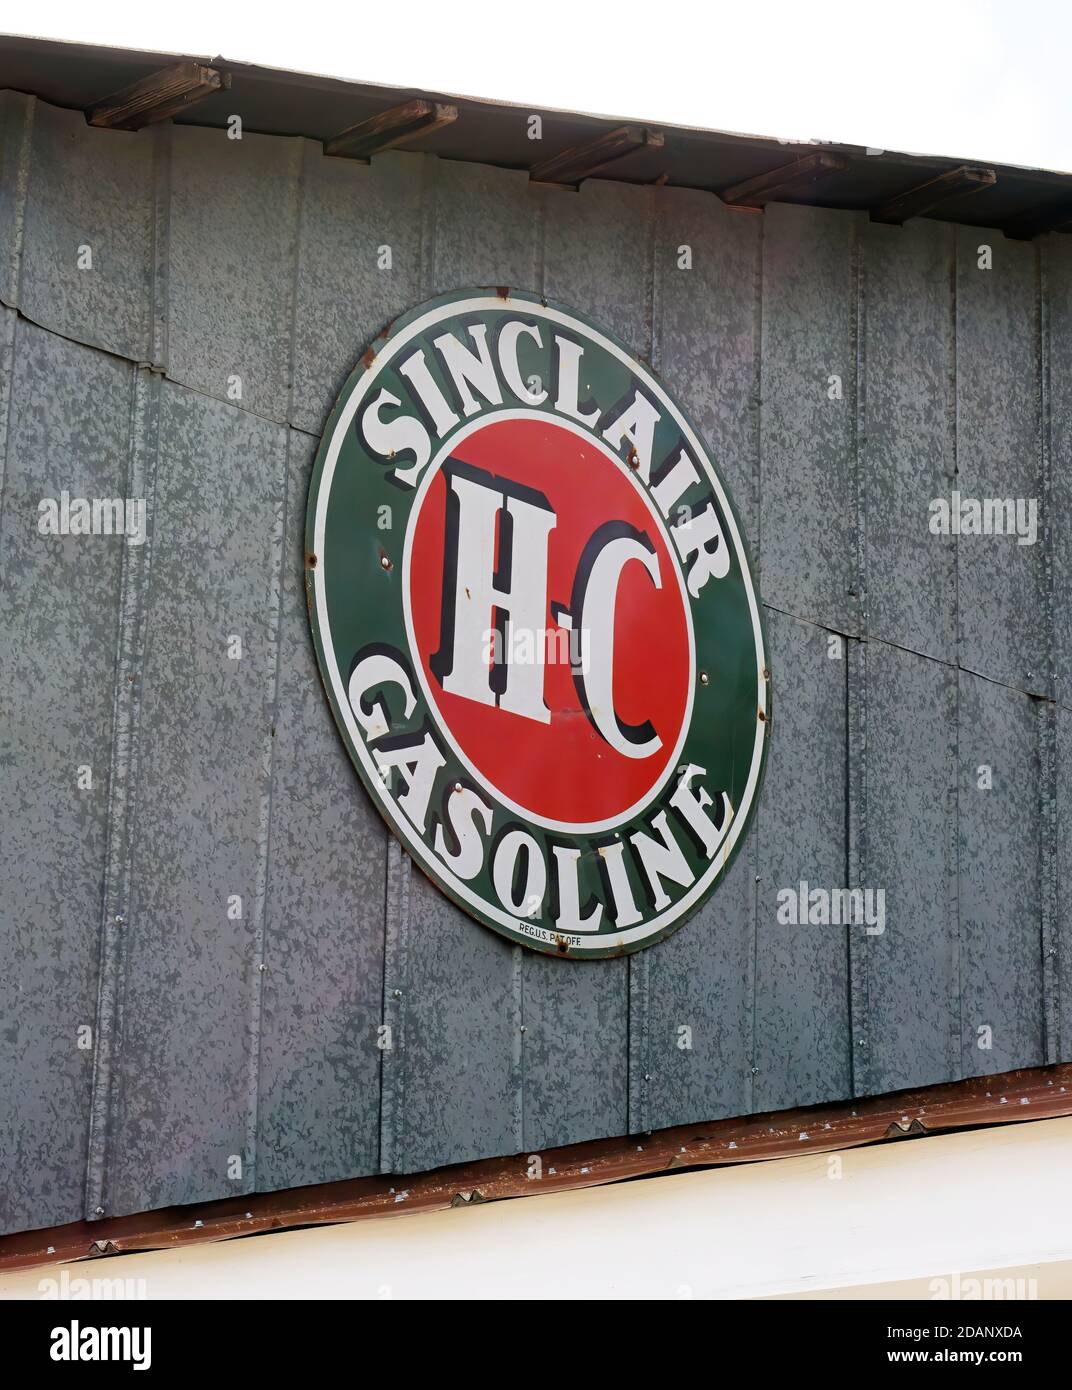 Antique Sinclair gas HC sign. The HC stood for High Compression gas which was introduced in 1926. Stock Photo